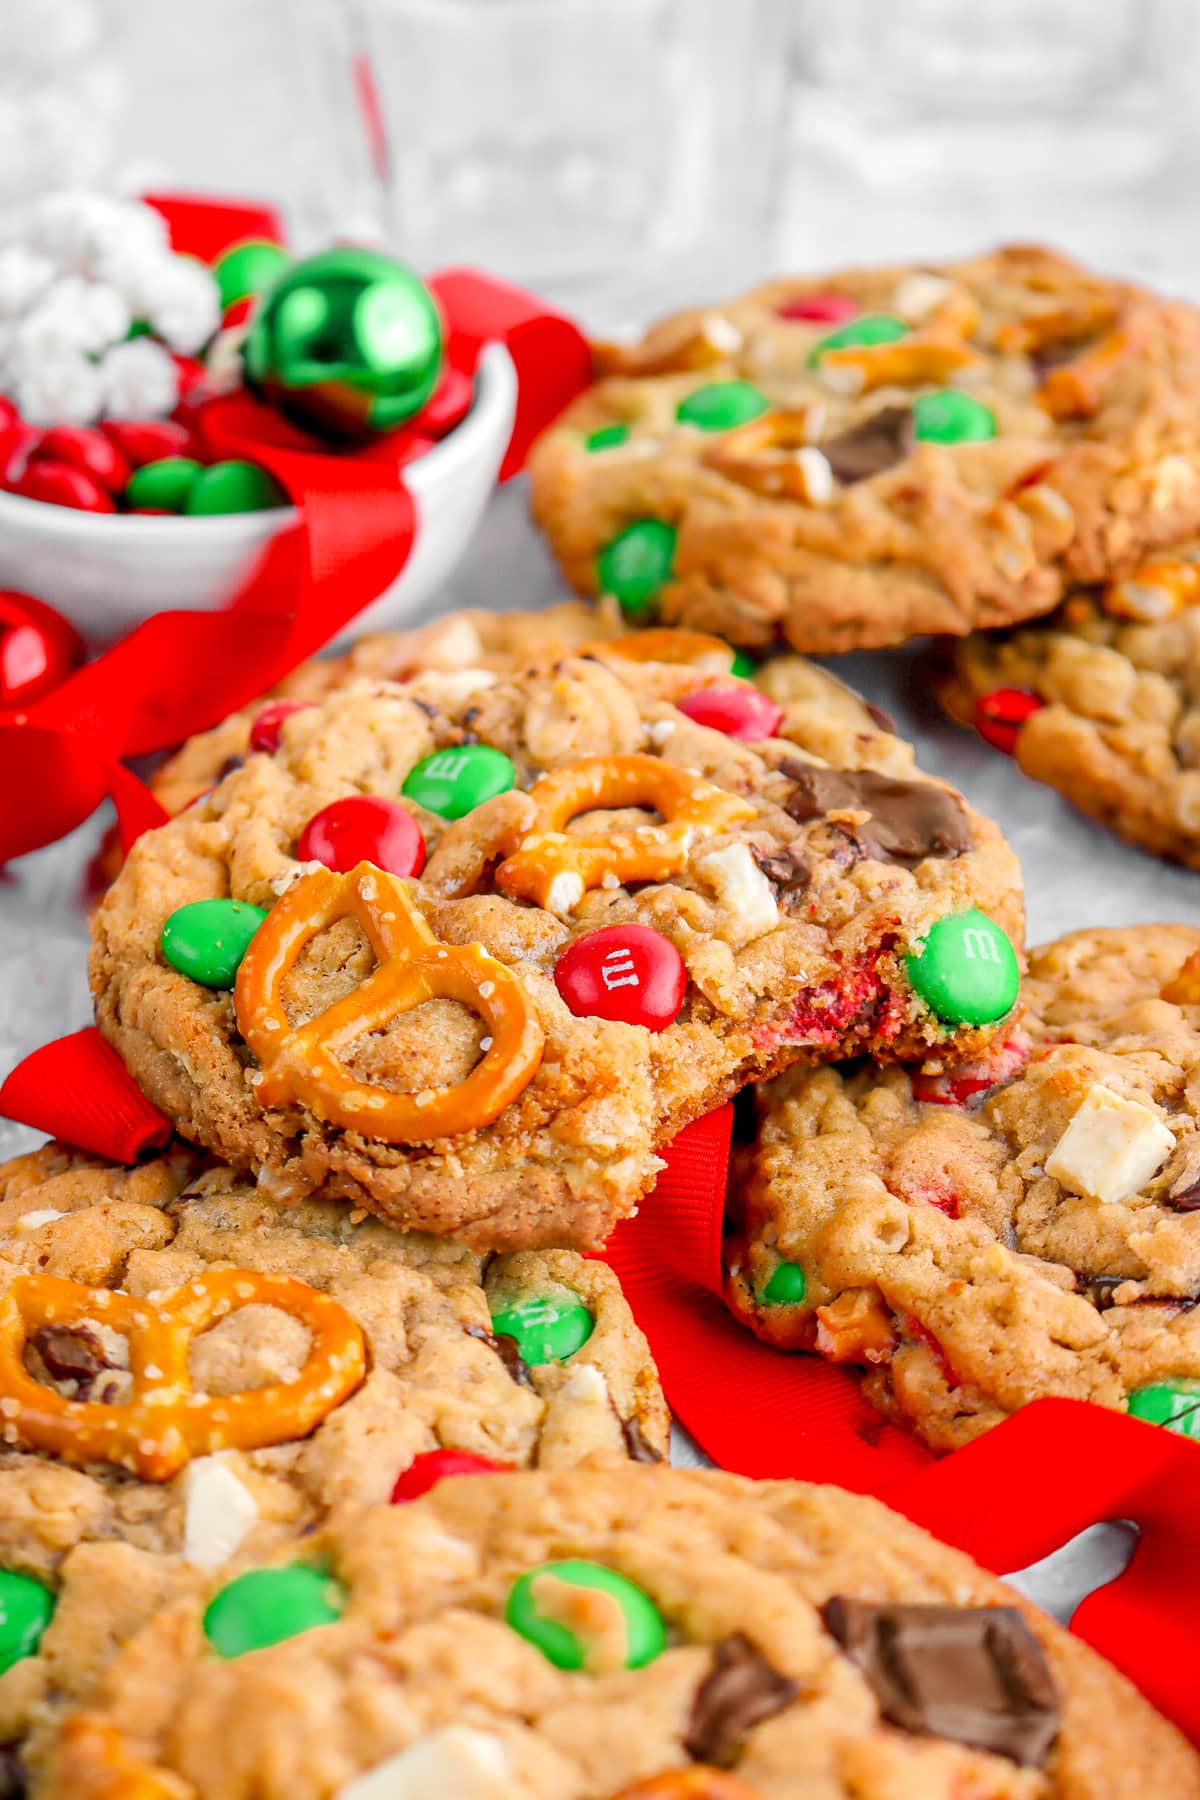 close up image of monster cookie with bite missing, a red ribbon, bowl of M&M's, and mini ornaments behind.